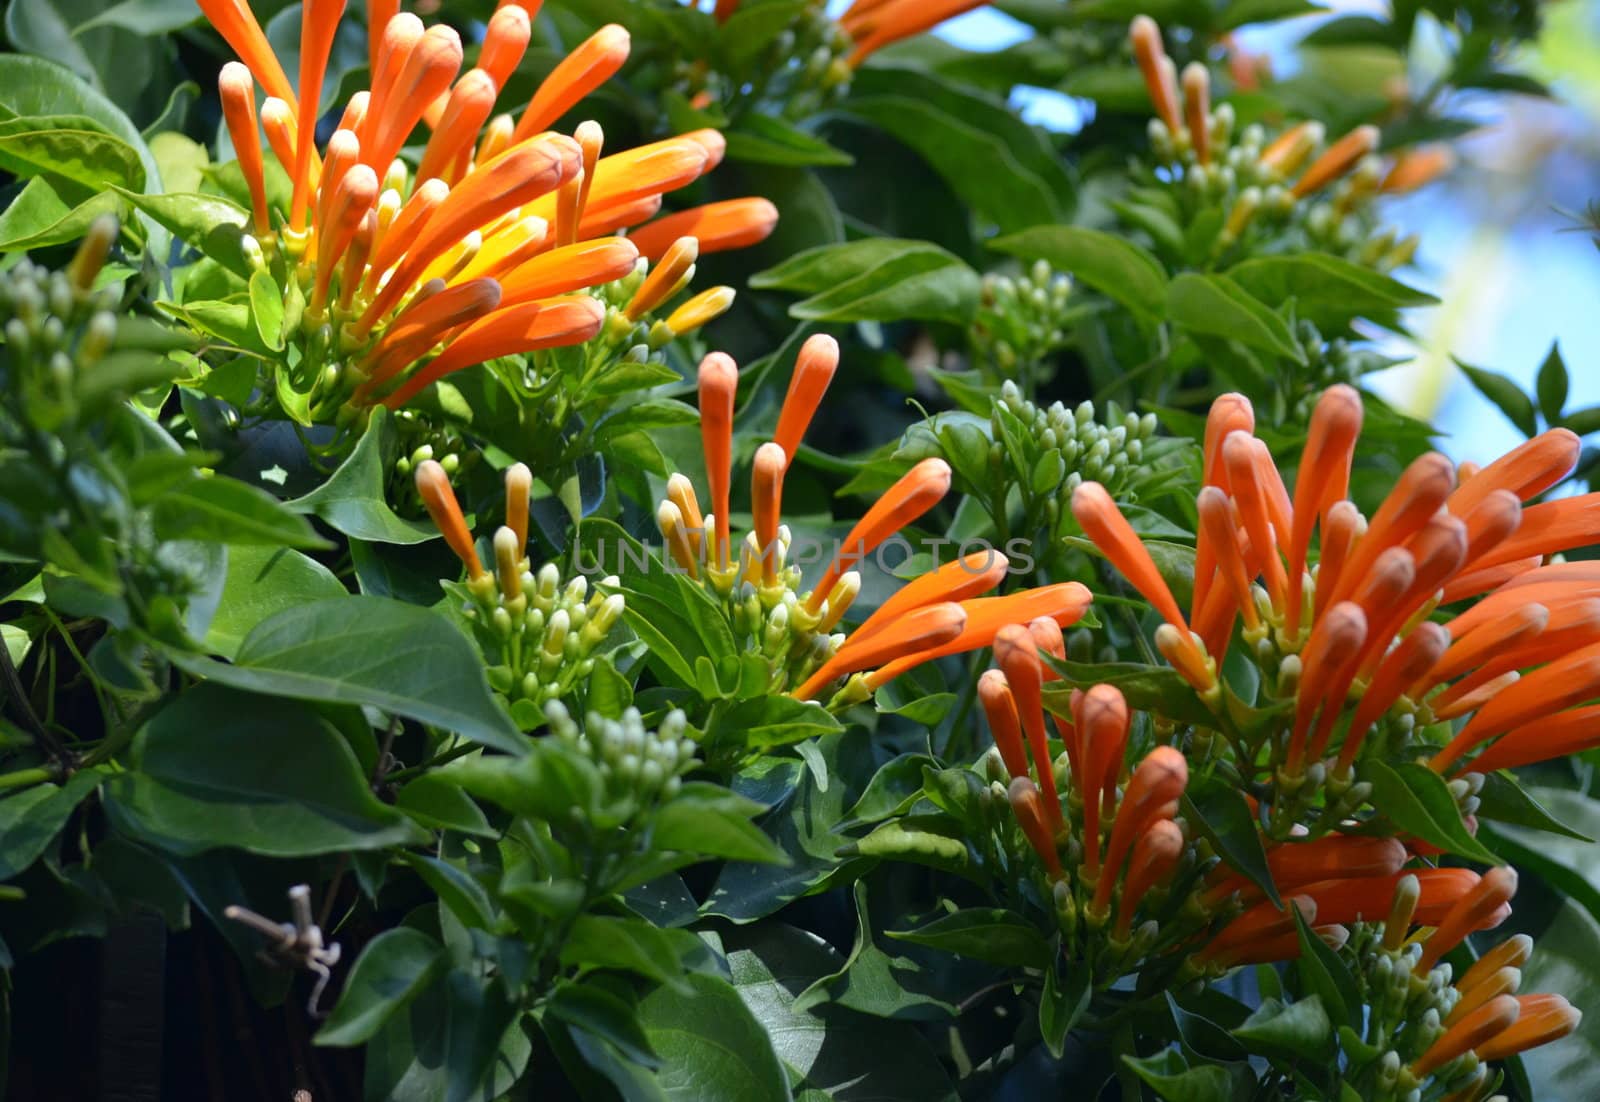 Climbing plant with orange flowers by KirbyWalkerPhotos